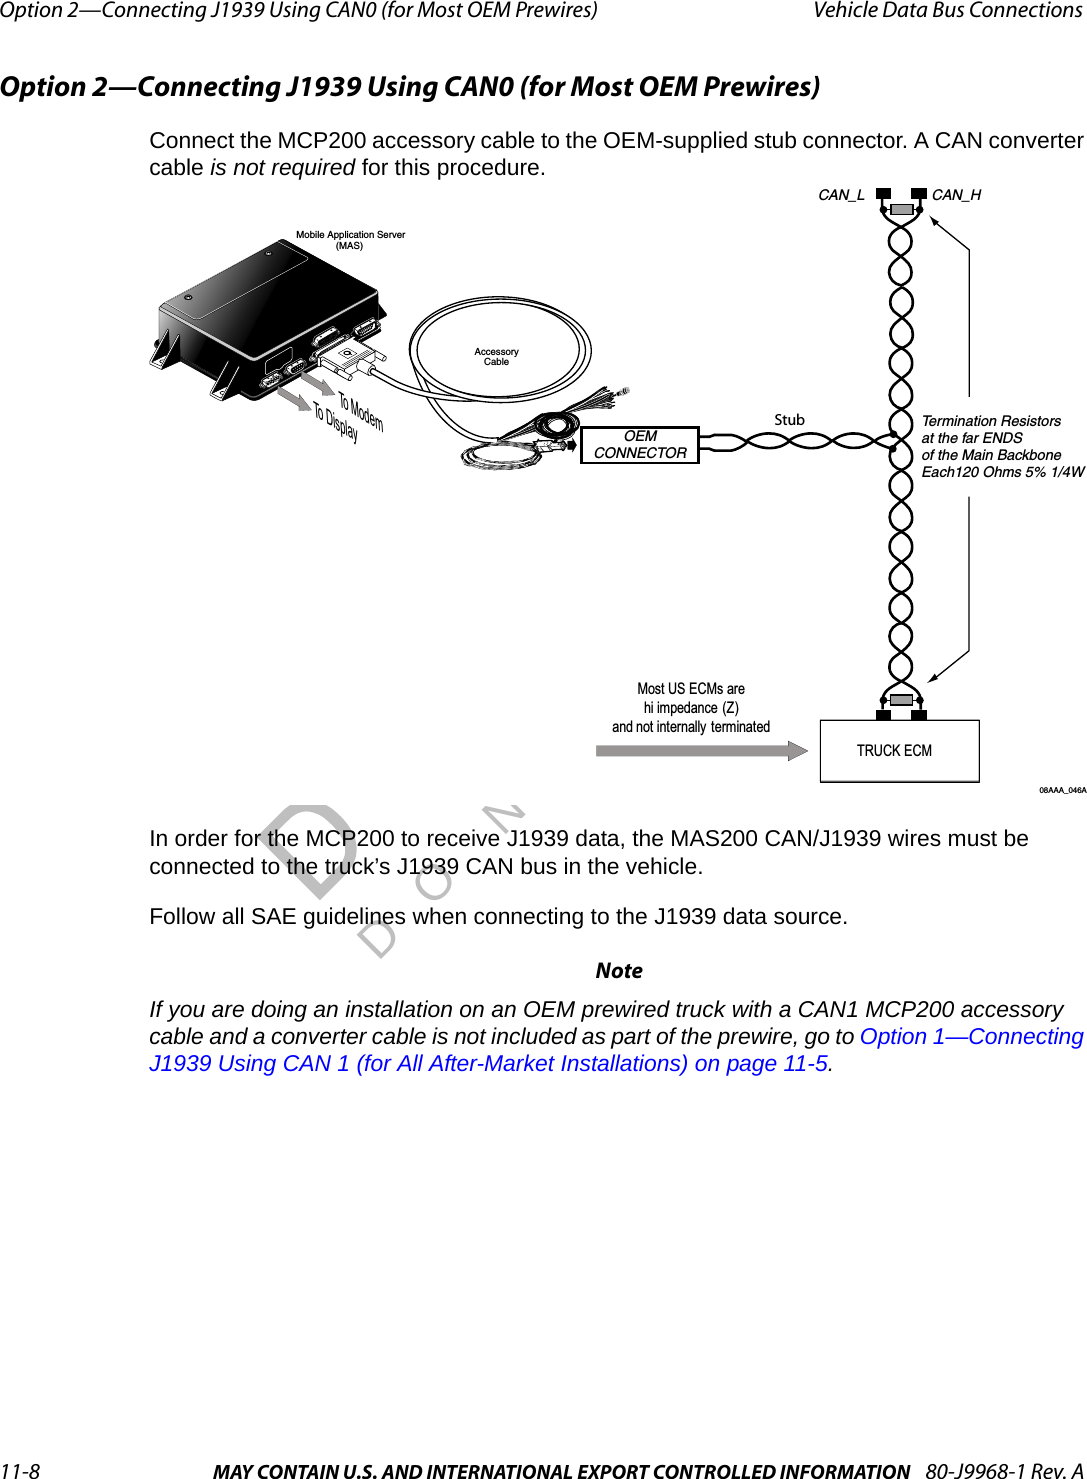 Option 2—Connecting J1939 Using CAN0 (for Most OEM Prewires) Vehicle Data Bus Connections11-8 MAY CONTAIN U.S. AND INTERNATIONAL EXPORT CONTROLLED INFORMATION 80-J9968-1 Rev. ADO NOT COPYOption 2—Connecting J1939 Using CAN0 (for Most OEM Prewires)Connect the MCP200 accessory cable to the OEM-supplied stub connector. A CAN converter cable is not required for this procedure.In order for the MCP200 to receive J1939 data, the MAS200 CAN/J1939 wires must be connected to the truck’s J1939 CAN bus in the vehicle.Follow all SAE guidelines when connecting to the J1939 data source.NoteIf you are doing an installation on an OEM prewired truck with a CAN1 MCP200 accessory cable and a converter cable is not included as part of the prewire, go to Option 1—Connecting J1939 Using CAN 1 (for All After-Market Installations) on page 11-5.CAN_HCAN_LTermination Resistorsat the far ENDSof the Main Backbone Each120 Ohms 5% 1/4W08AAA_046AOEMCONNECTORTRUCK ECMMost US ECMs are hi impedance (Z) and not internally  terminated Mobile Application Server(MAS)AccessoryCableTo ModemTo DisplayStub